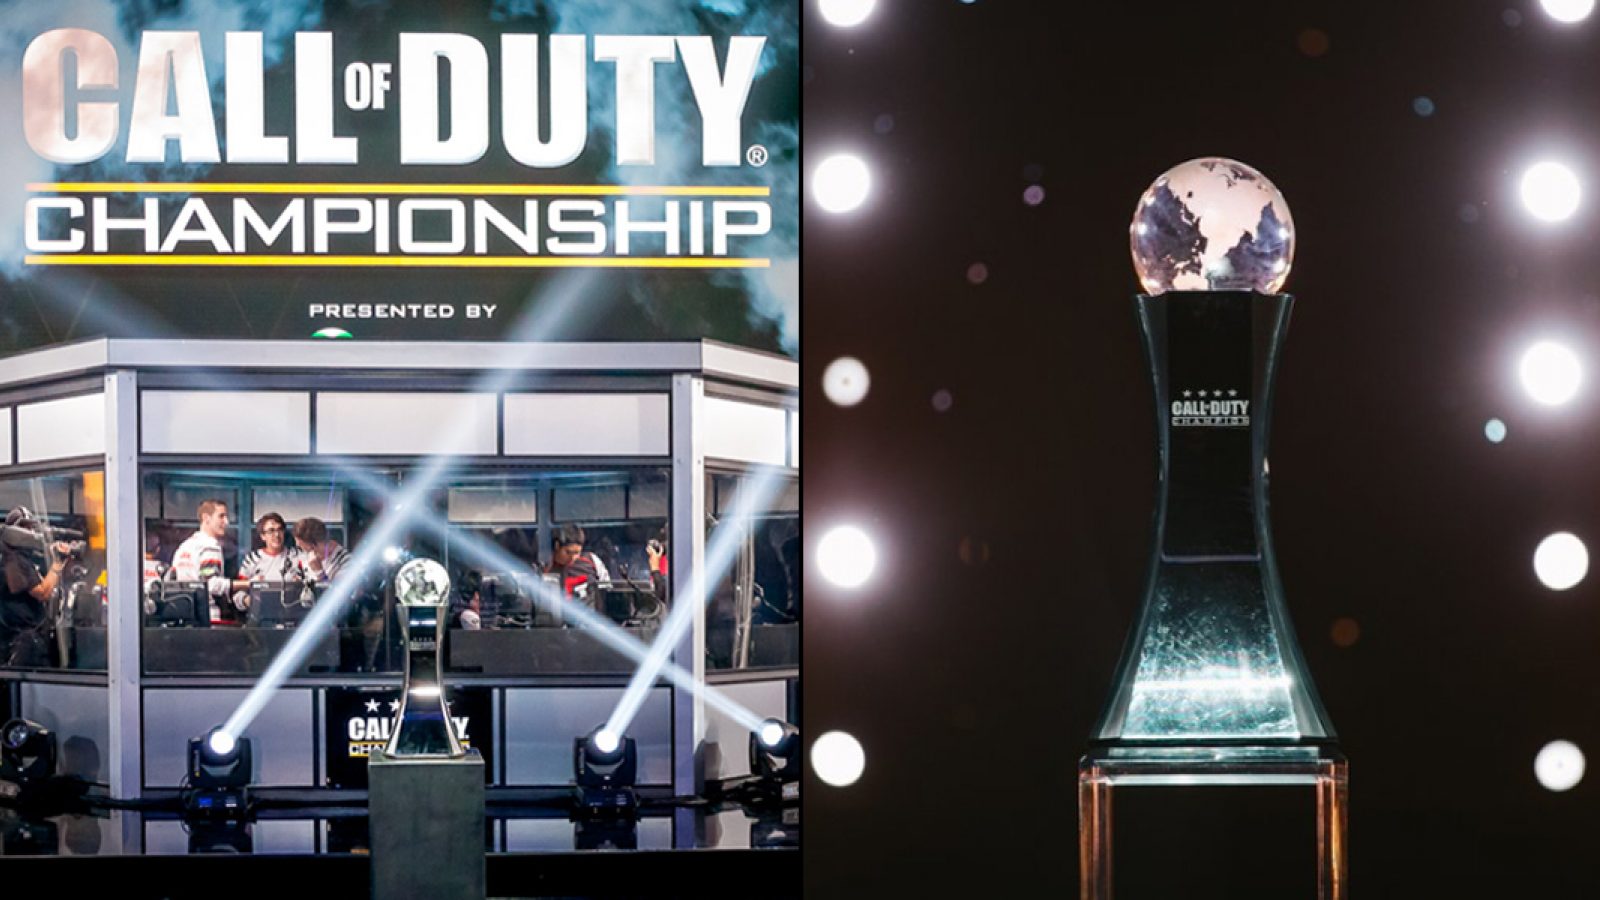 All players & teams that won a Call of Duty World Championship